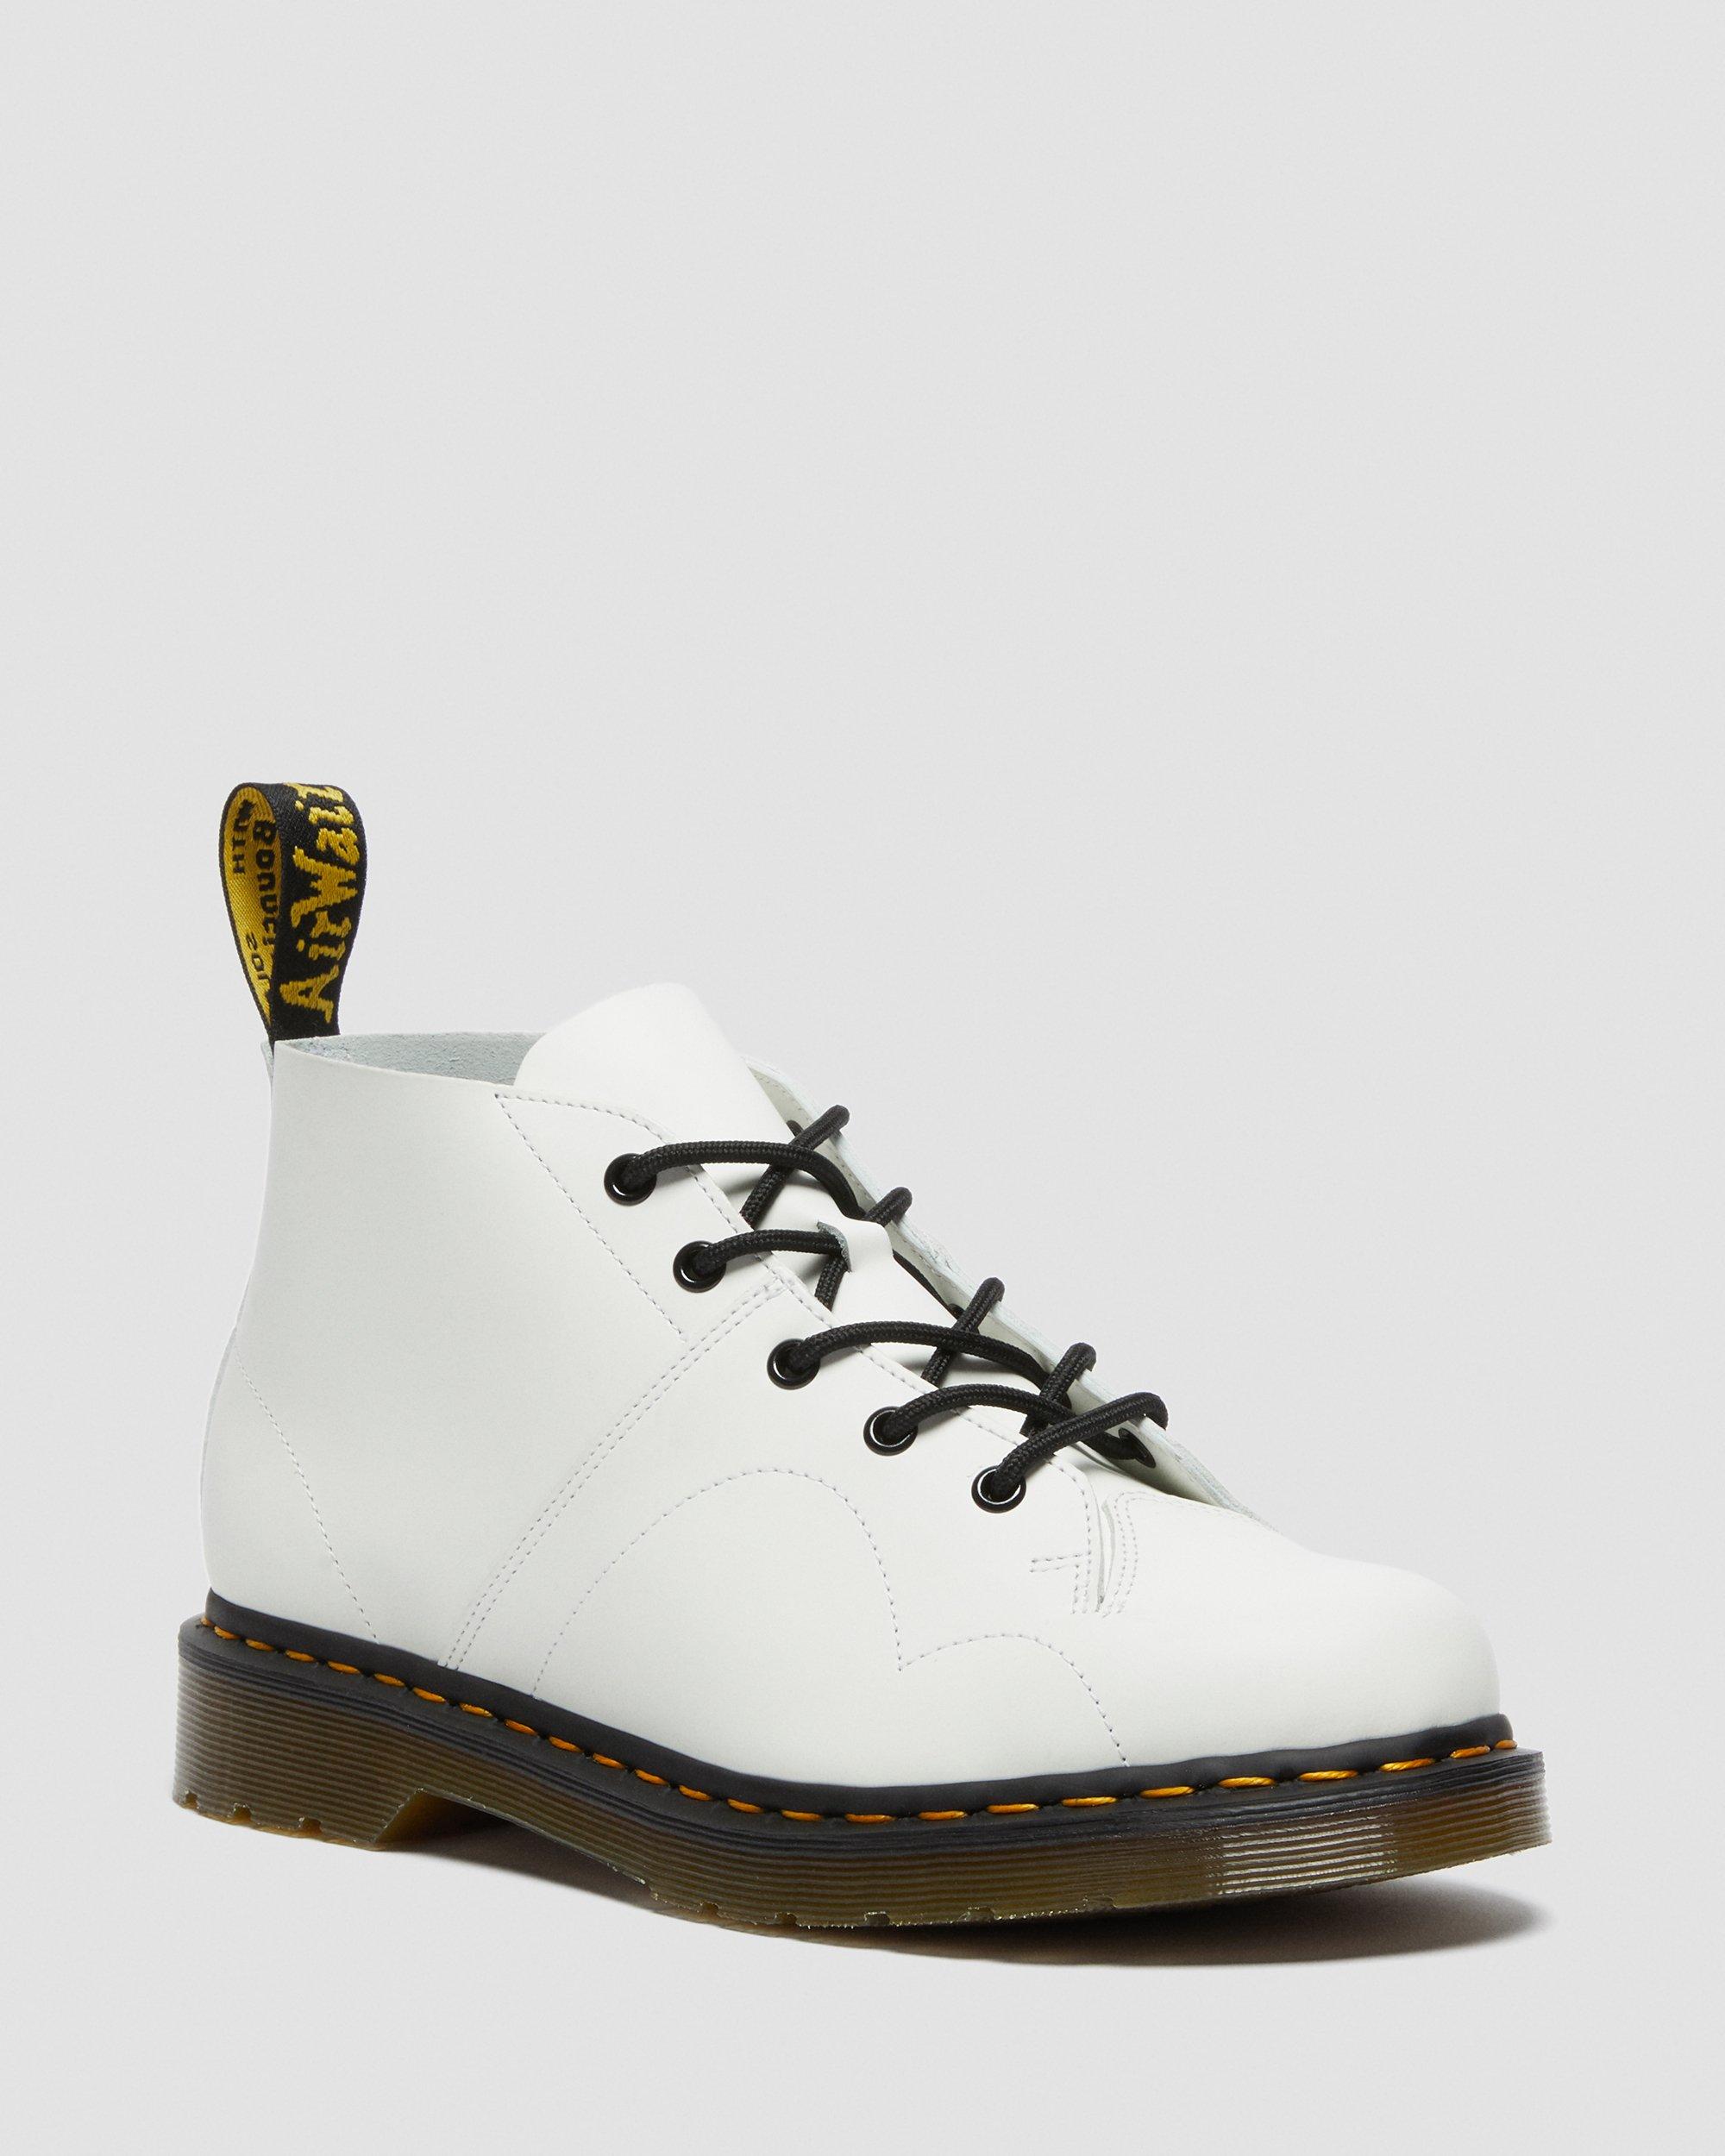 Church Smooth Leather Monkey Boots | Dr. Martens